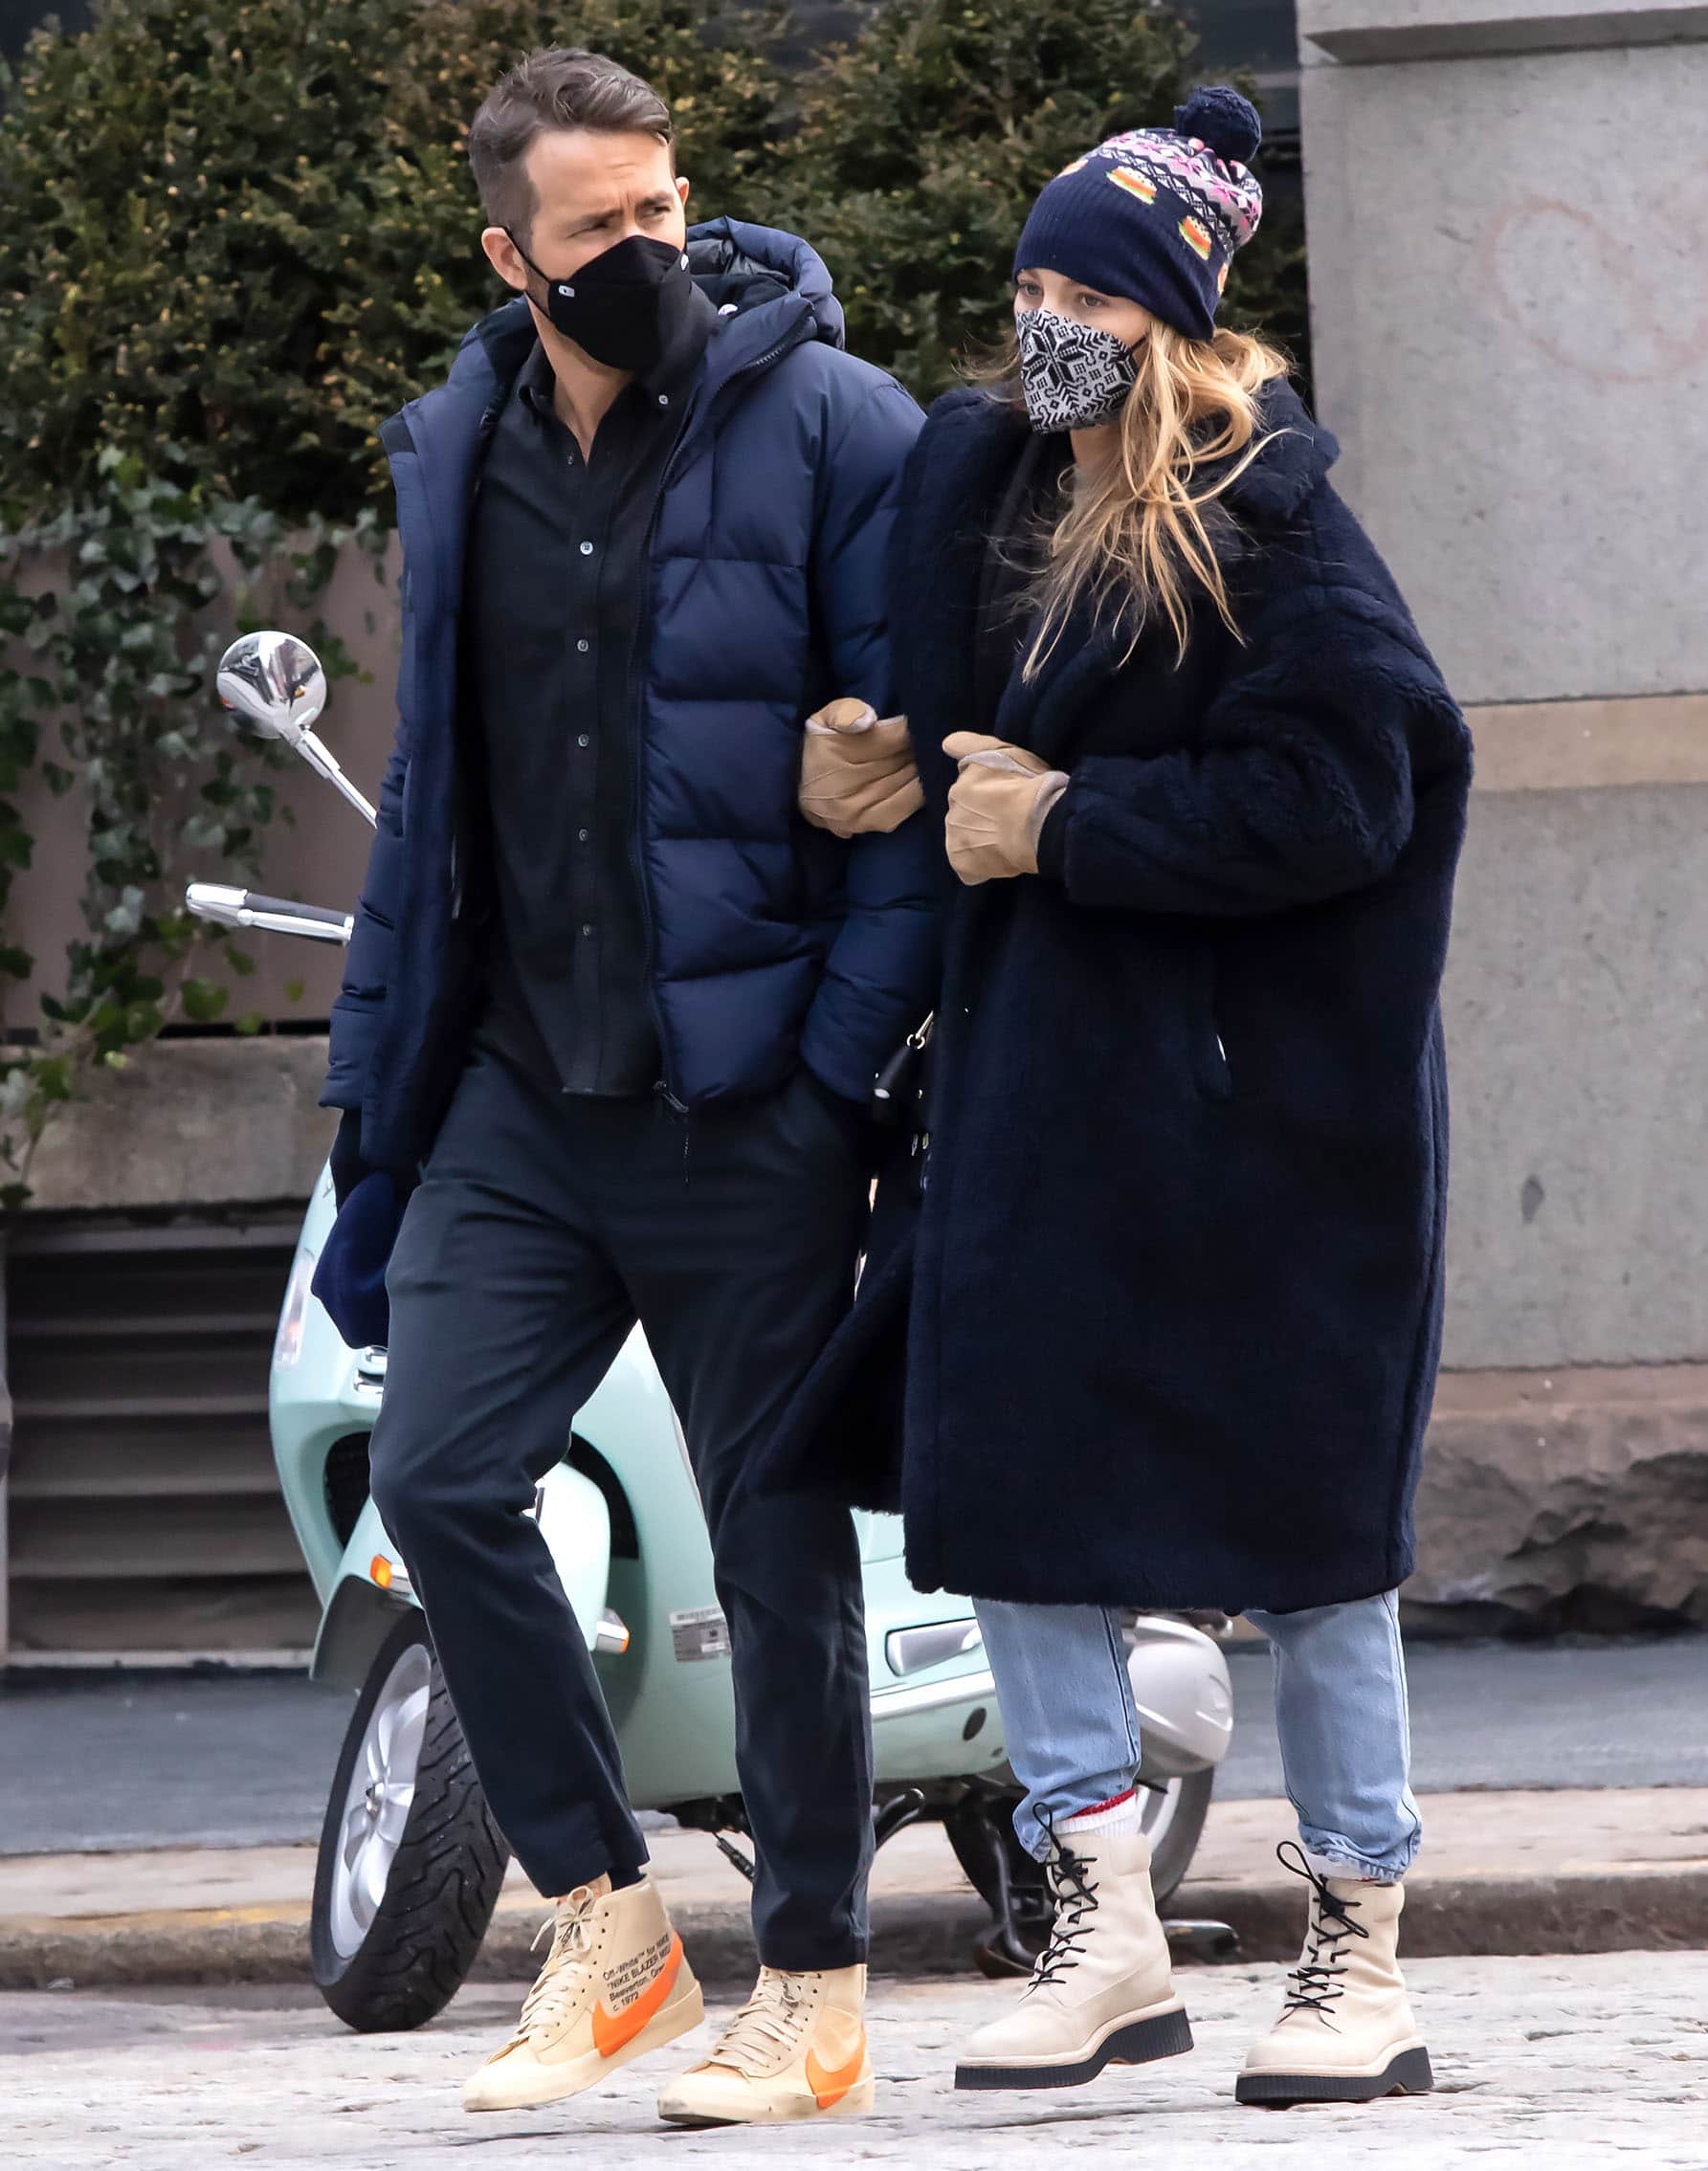 Blake Lively matches her husband in a navy Max Mara Teddy coat and DL1961 Emilie jeans